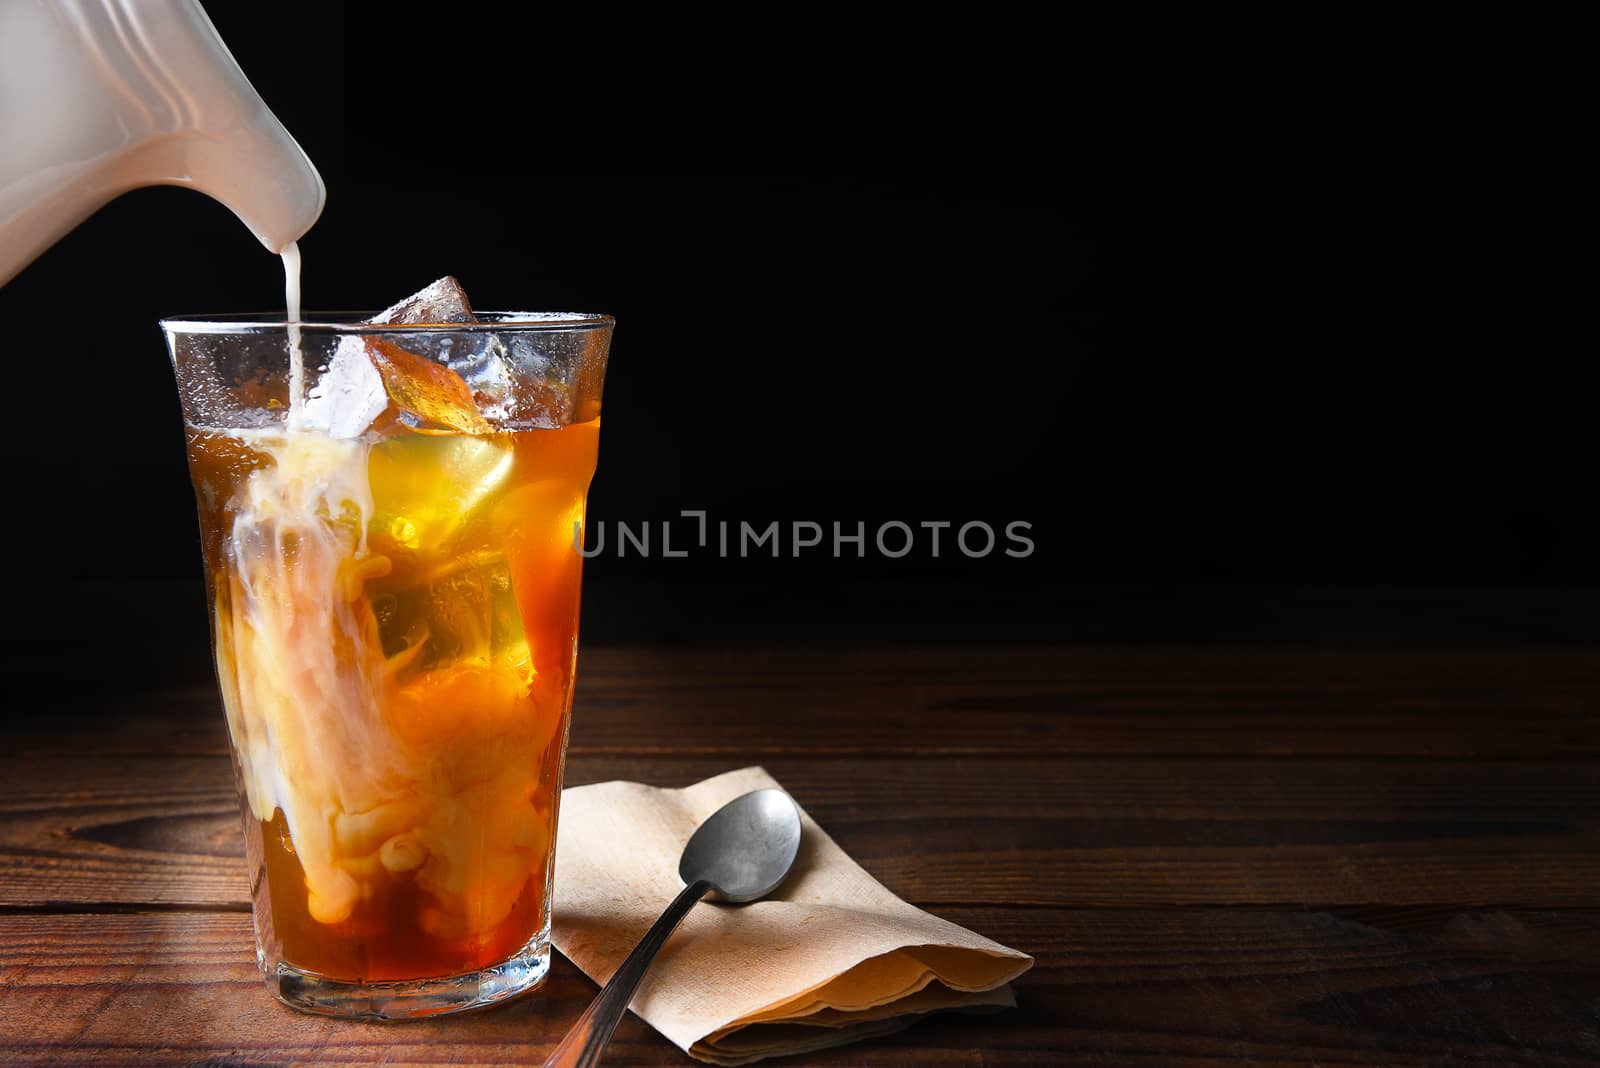 Closeup of a glass of iced coffee on a dark wood table. Fresh pouring cream is permeating through the glass with a spoon and napkin next to the glass. Horizontal on a black background with copy space.